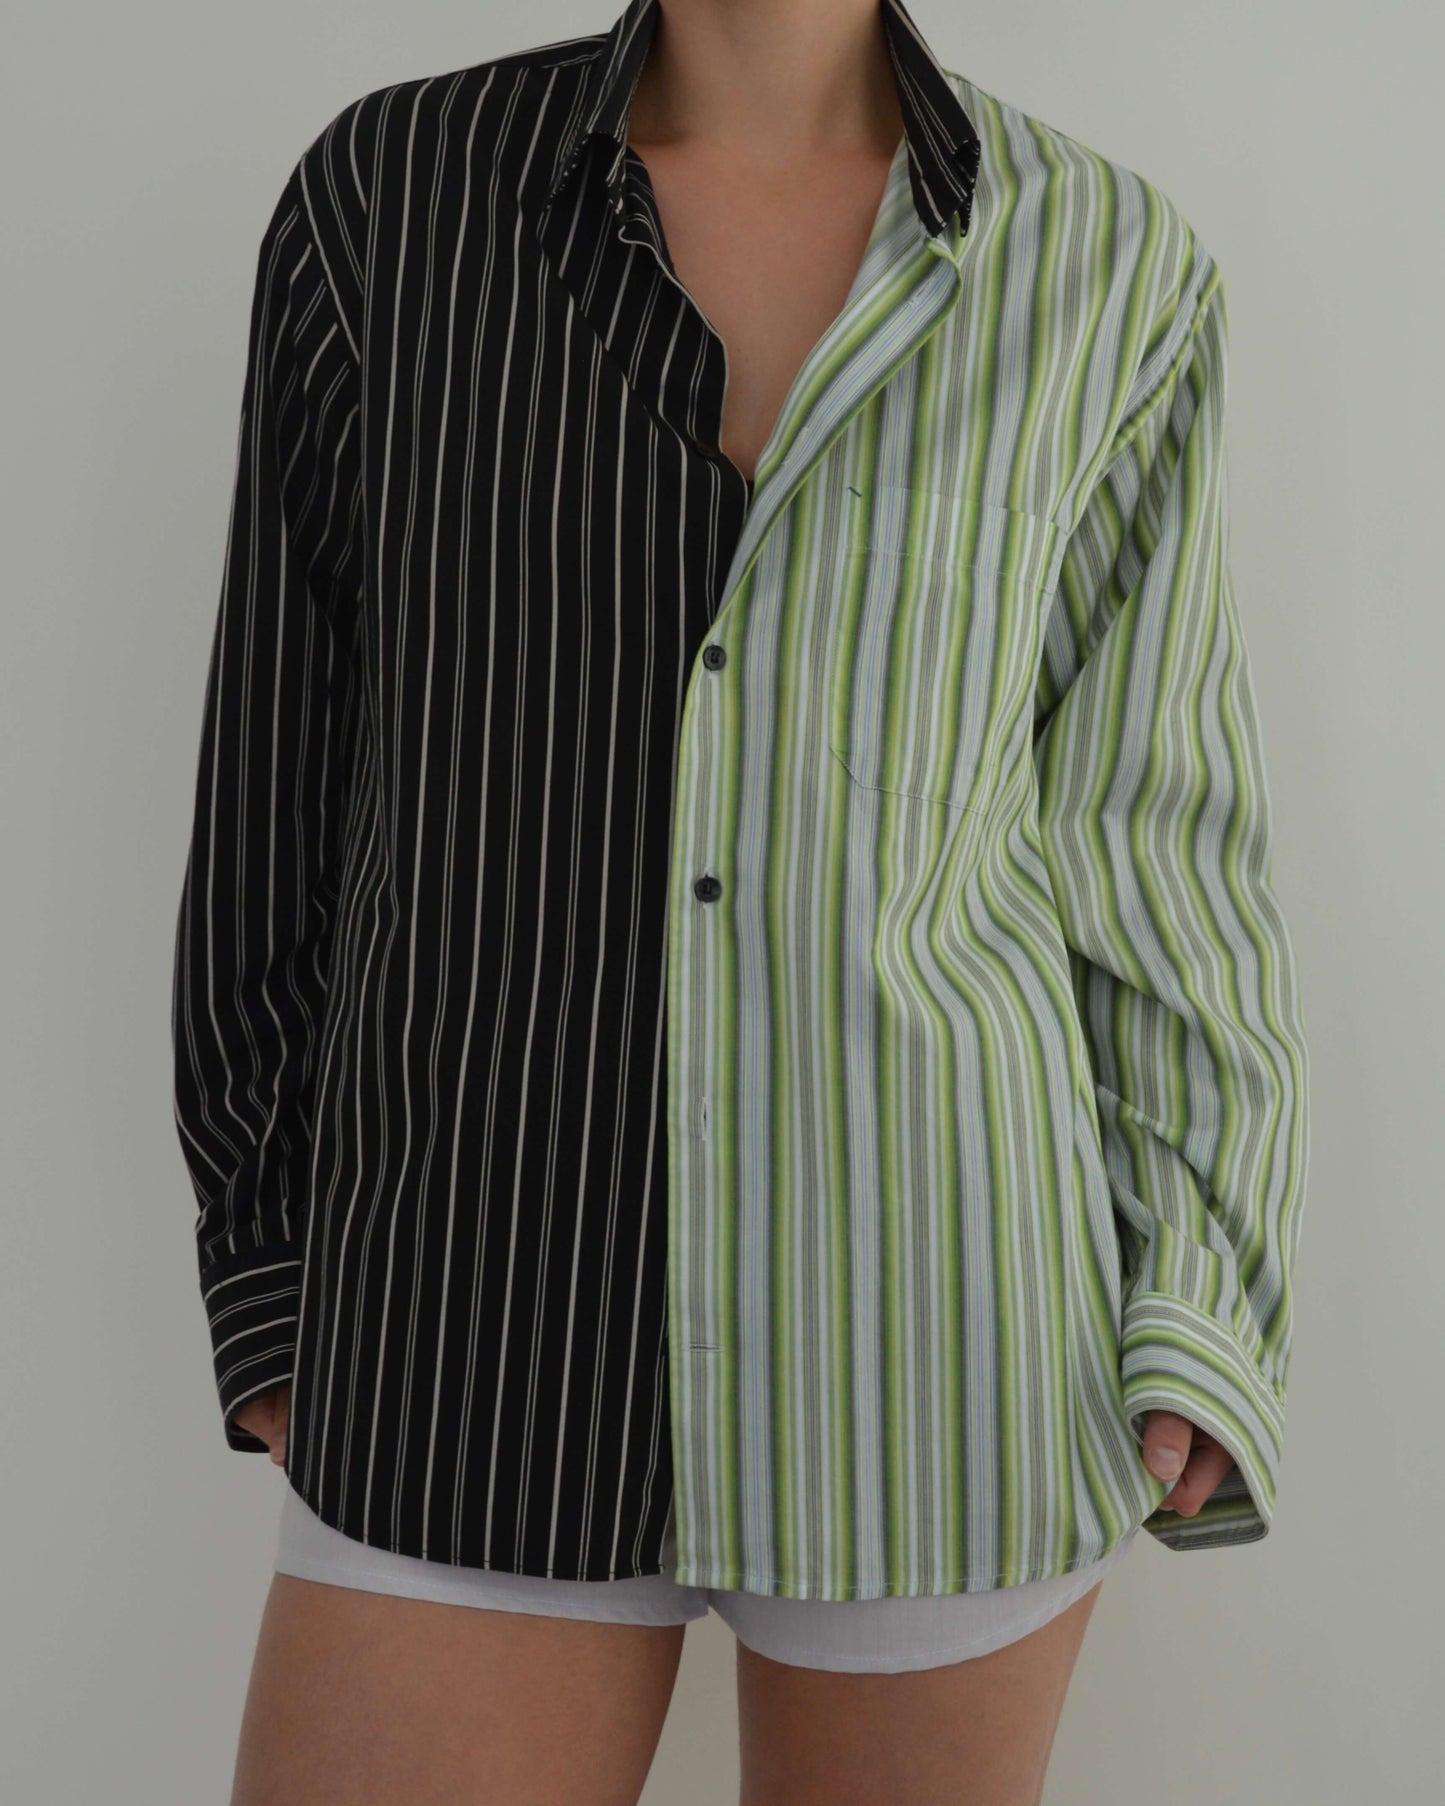 DUO Shirt - Perfect Contrast (S/L)